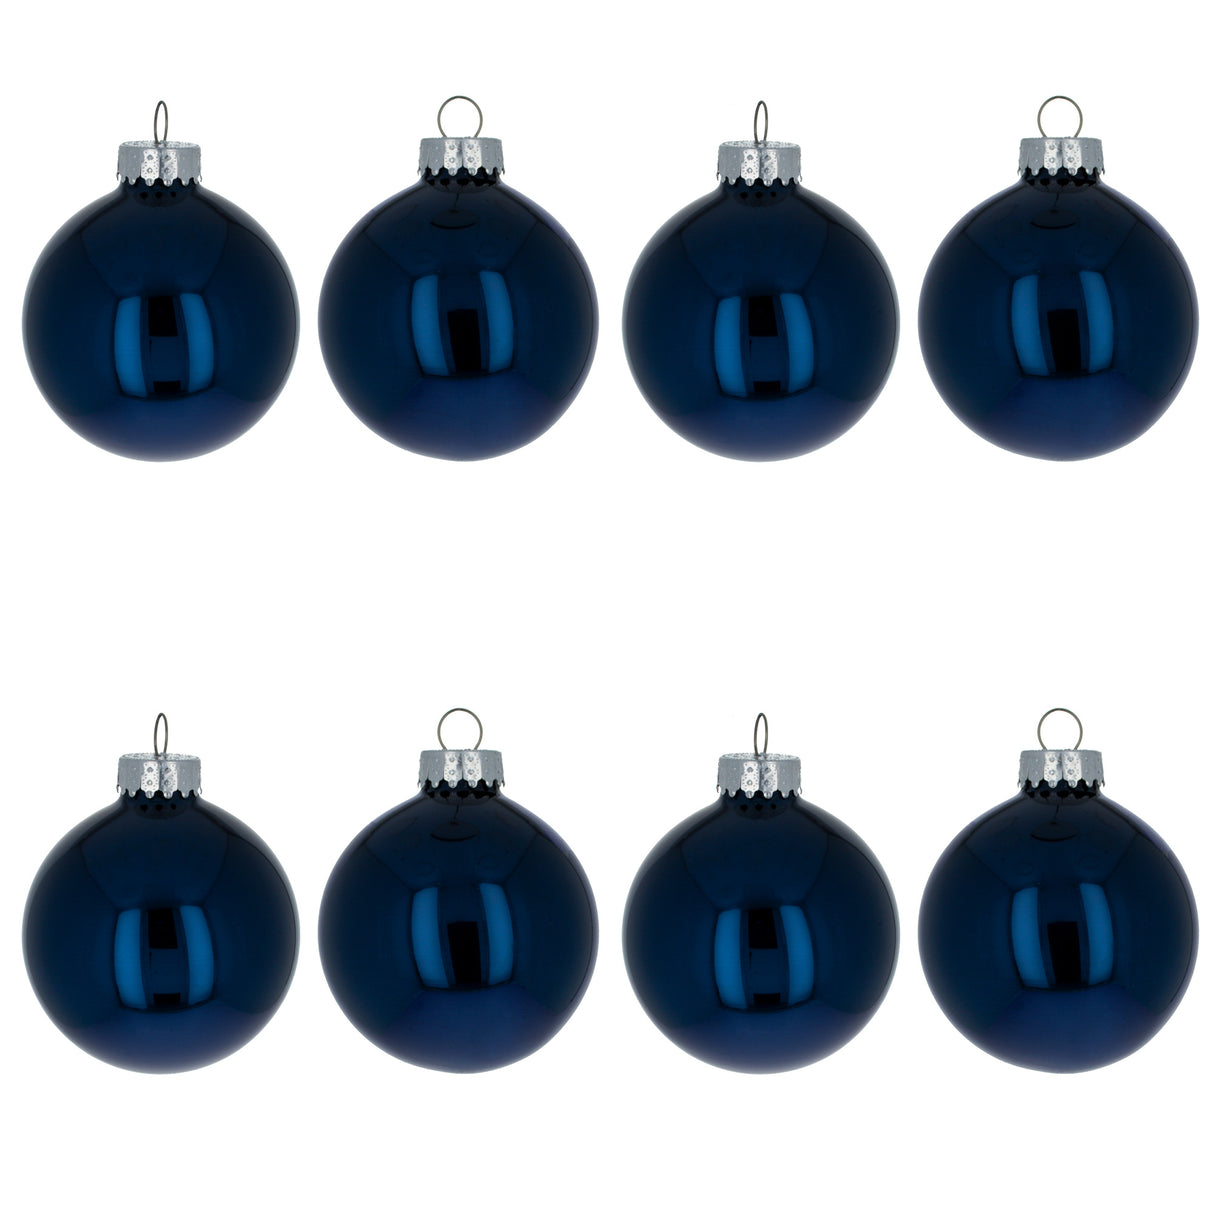 Set of 8 Shiny Blue Glass Christmas Ball Ornament DIY Craft 2.6 Inches in Blue color, Round shape